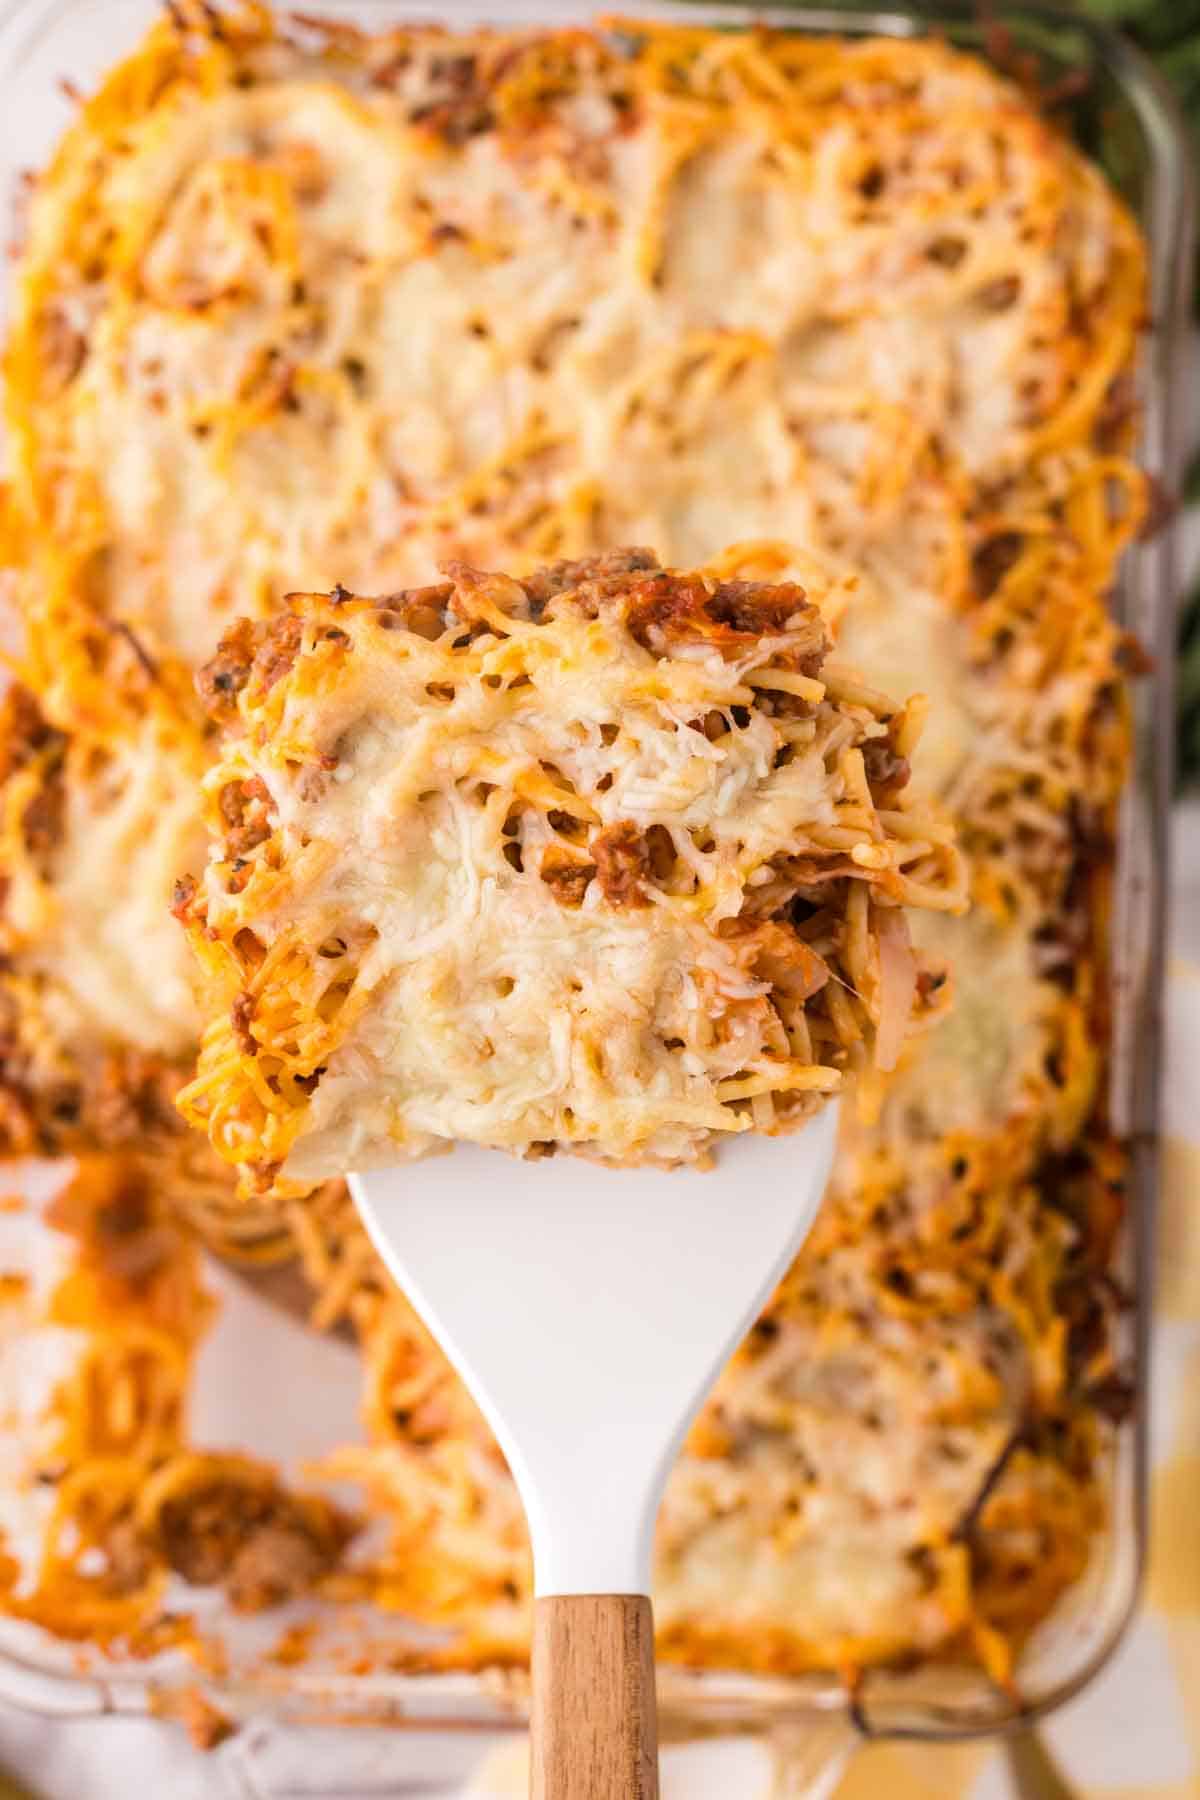 Up close view of baked spaghetti on a spatula.